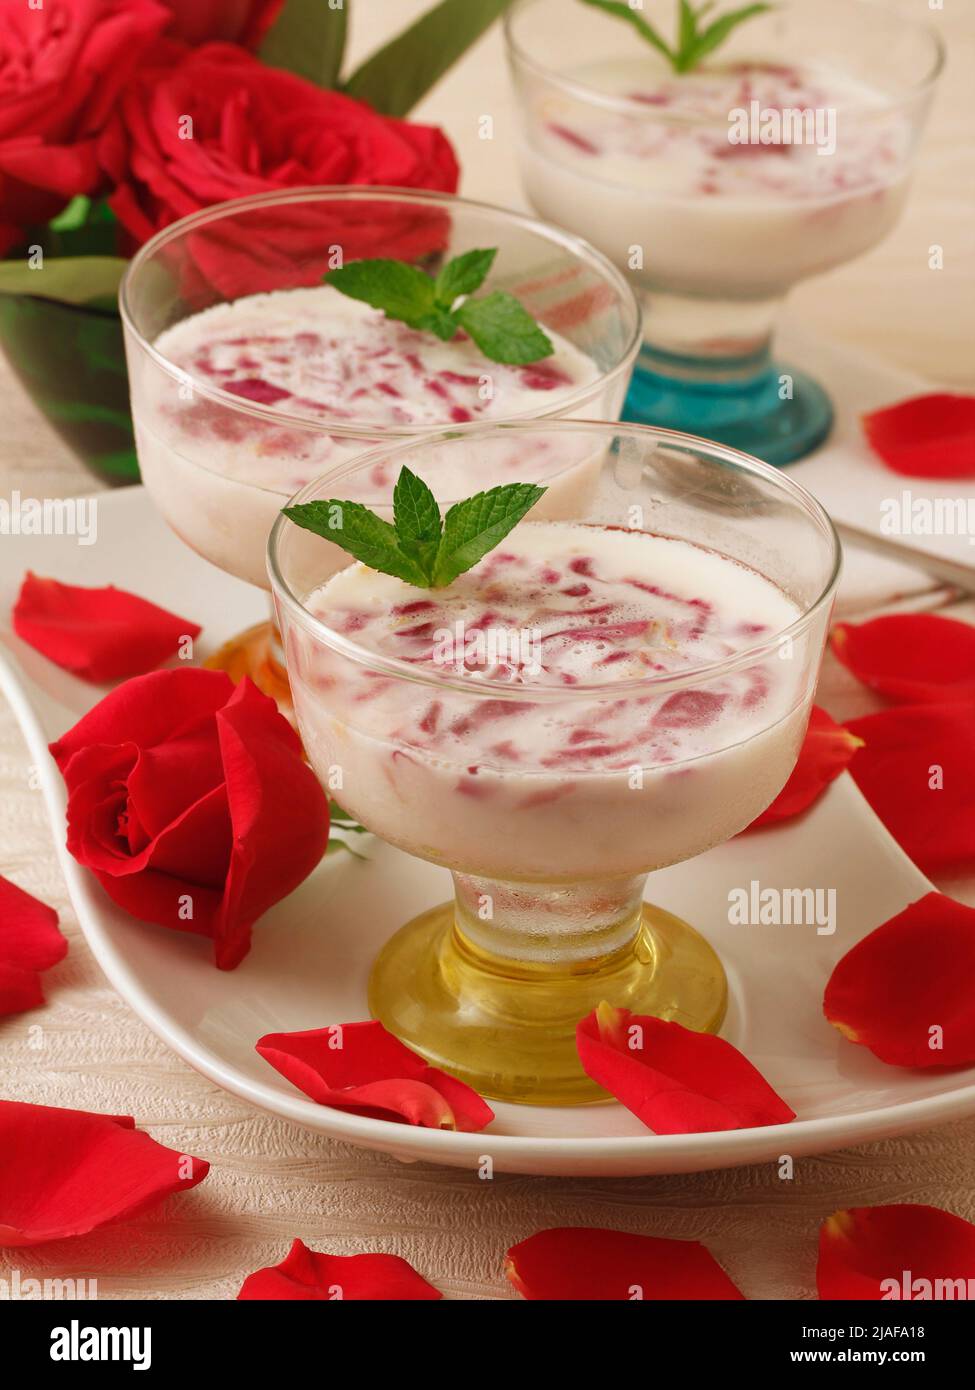 Curd and roses. Stock Photo